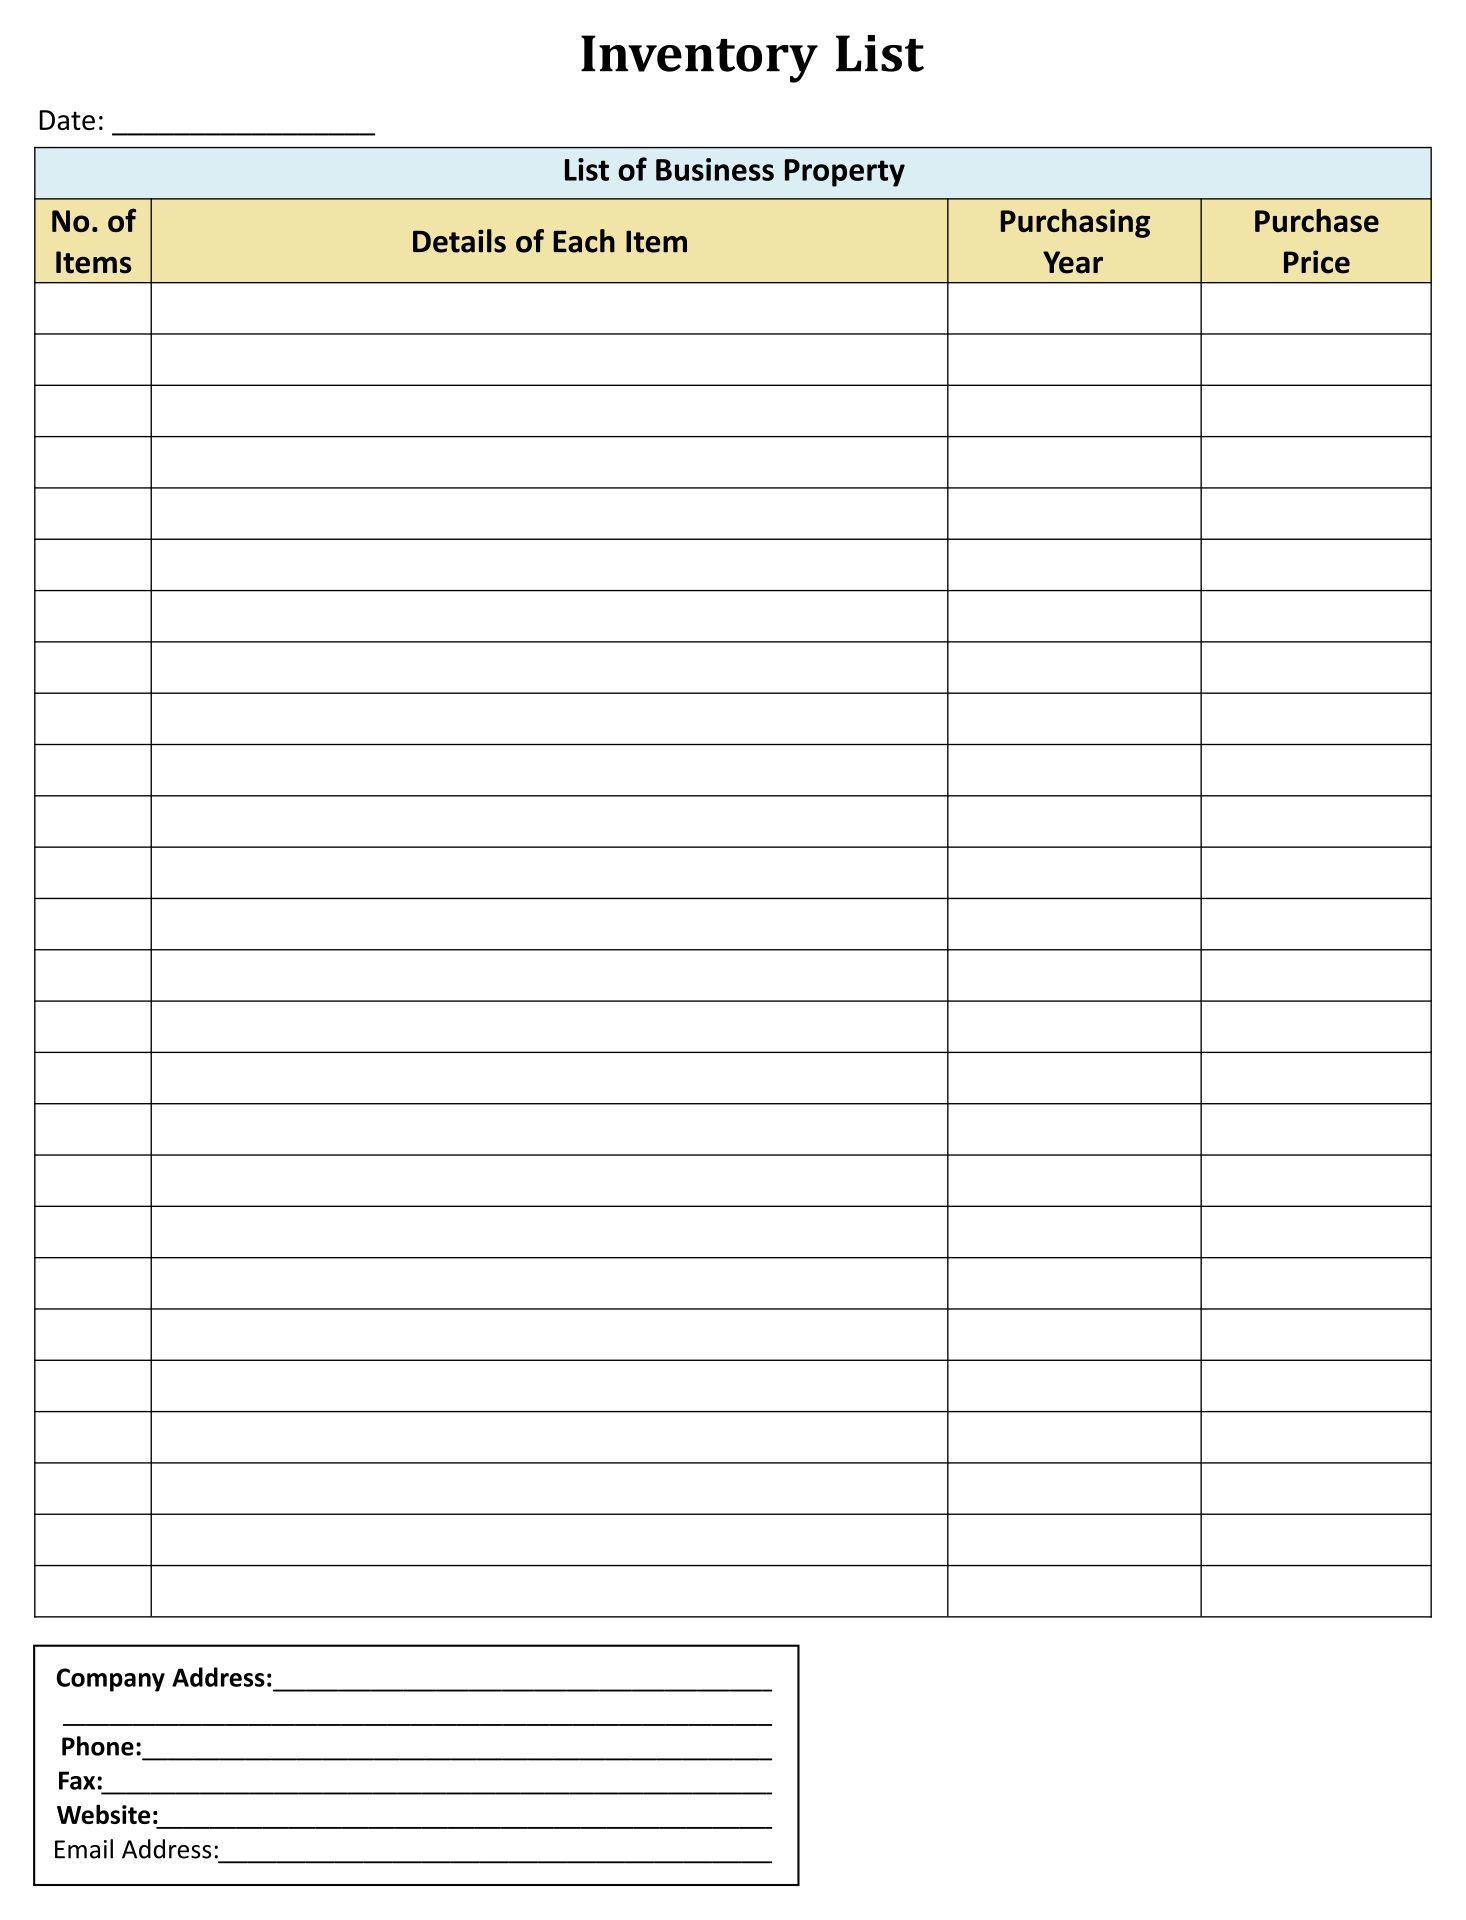 paper-calendars-planners-inventory-tracker-inventory-log-inventory